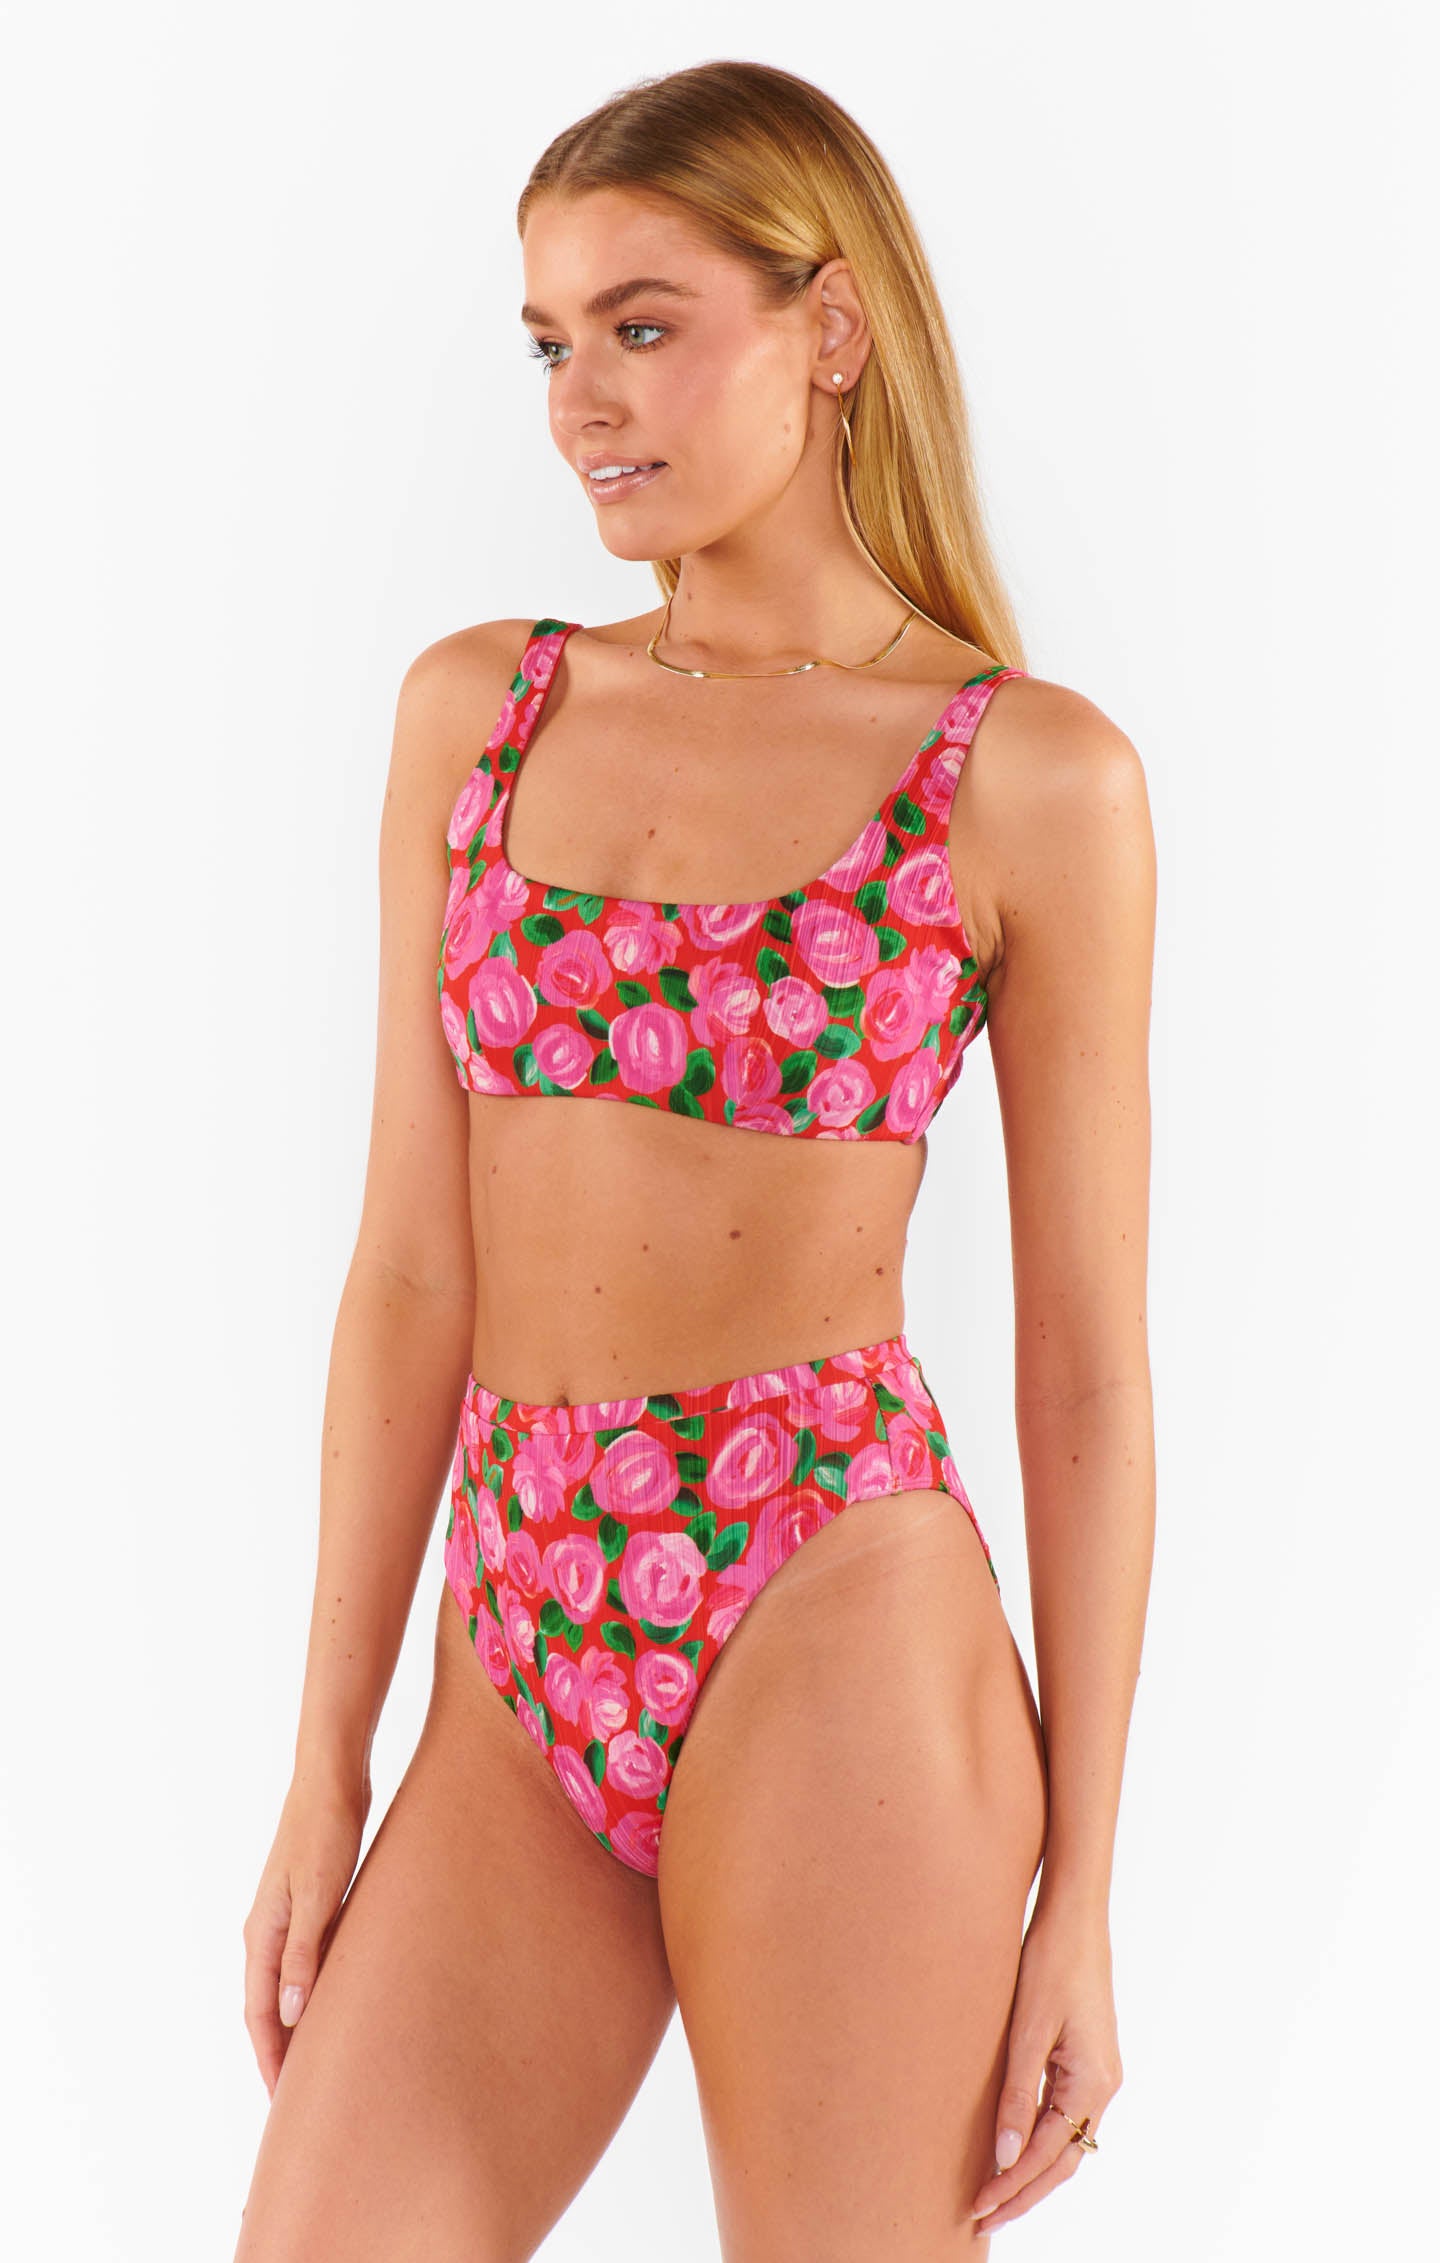 This tankini top and high-rise bottom by Spanx ($128 and $98 at